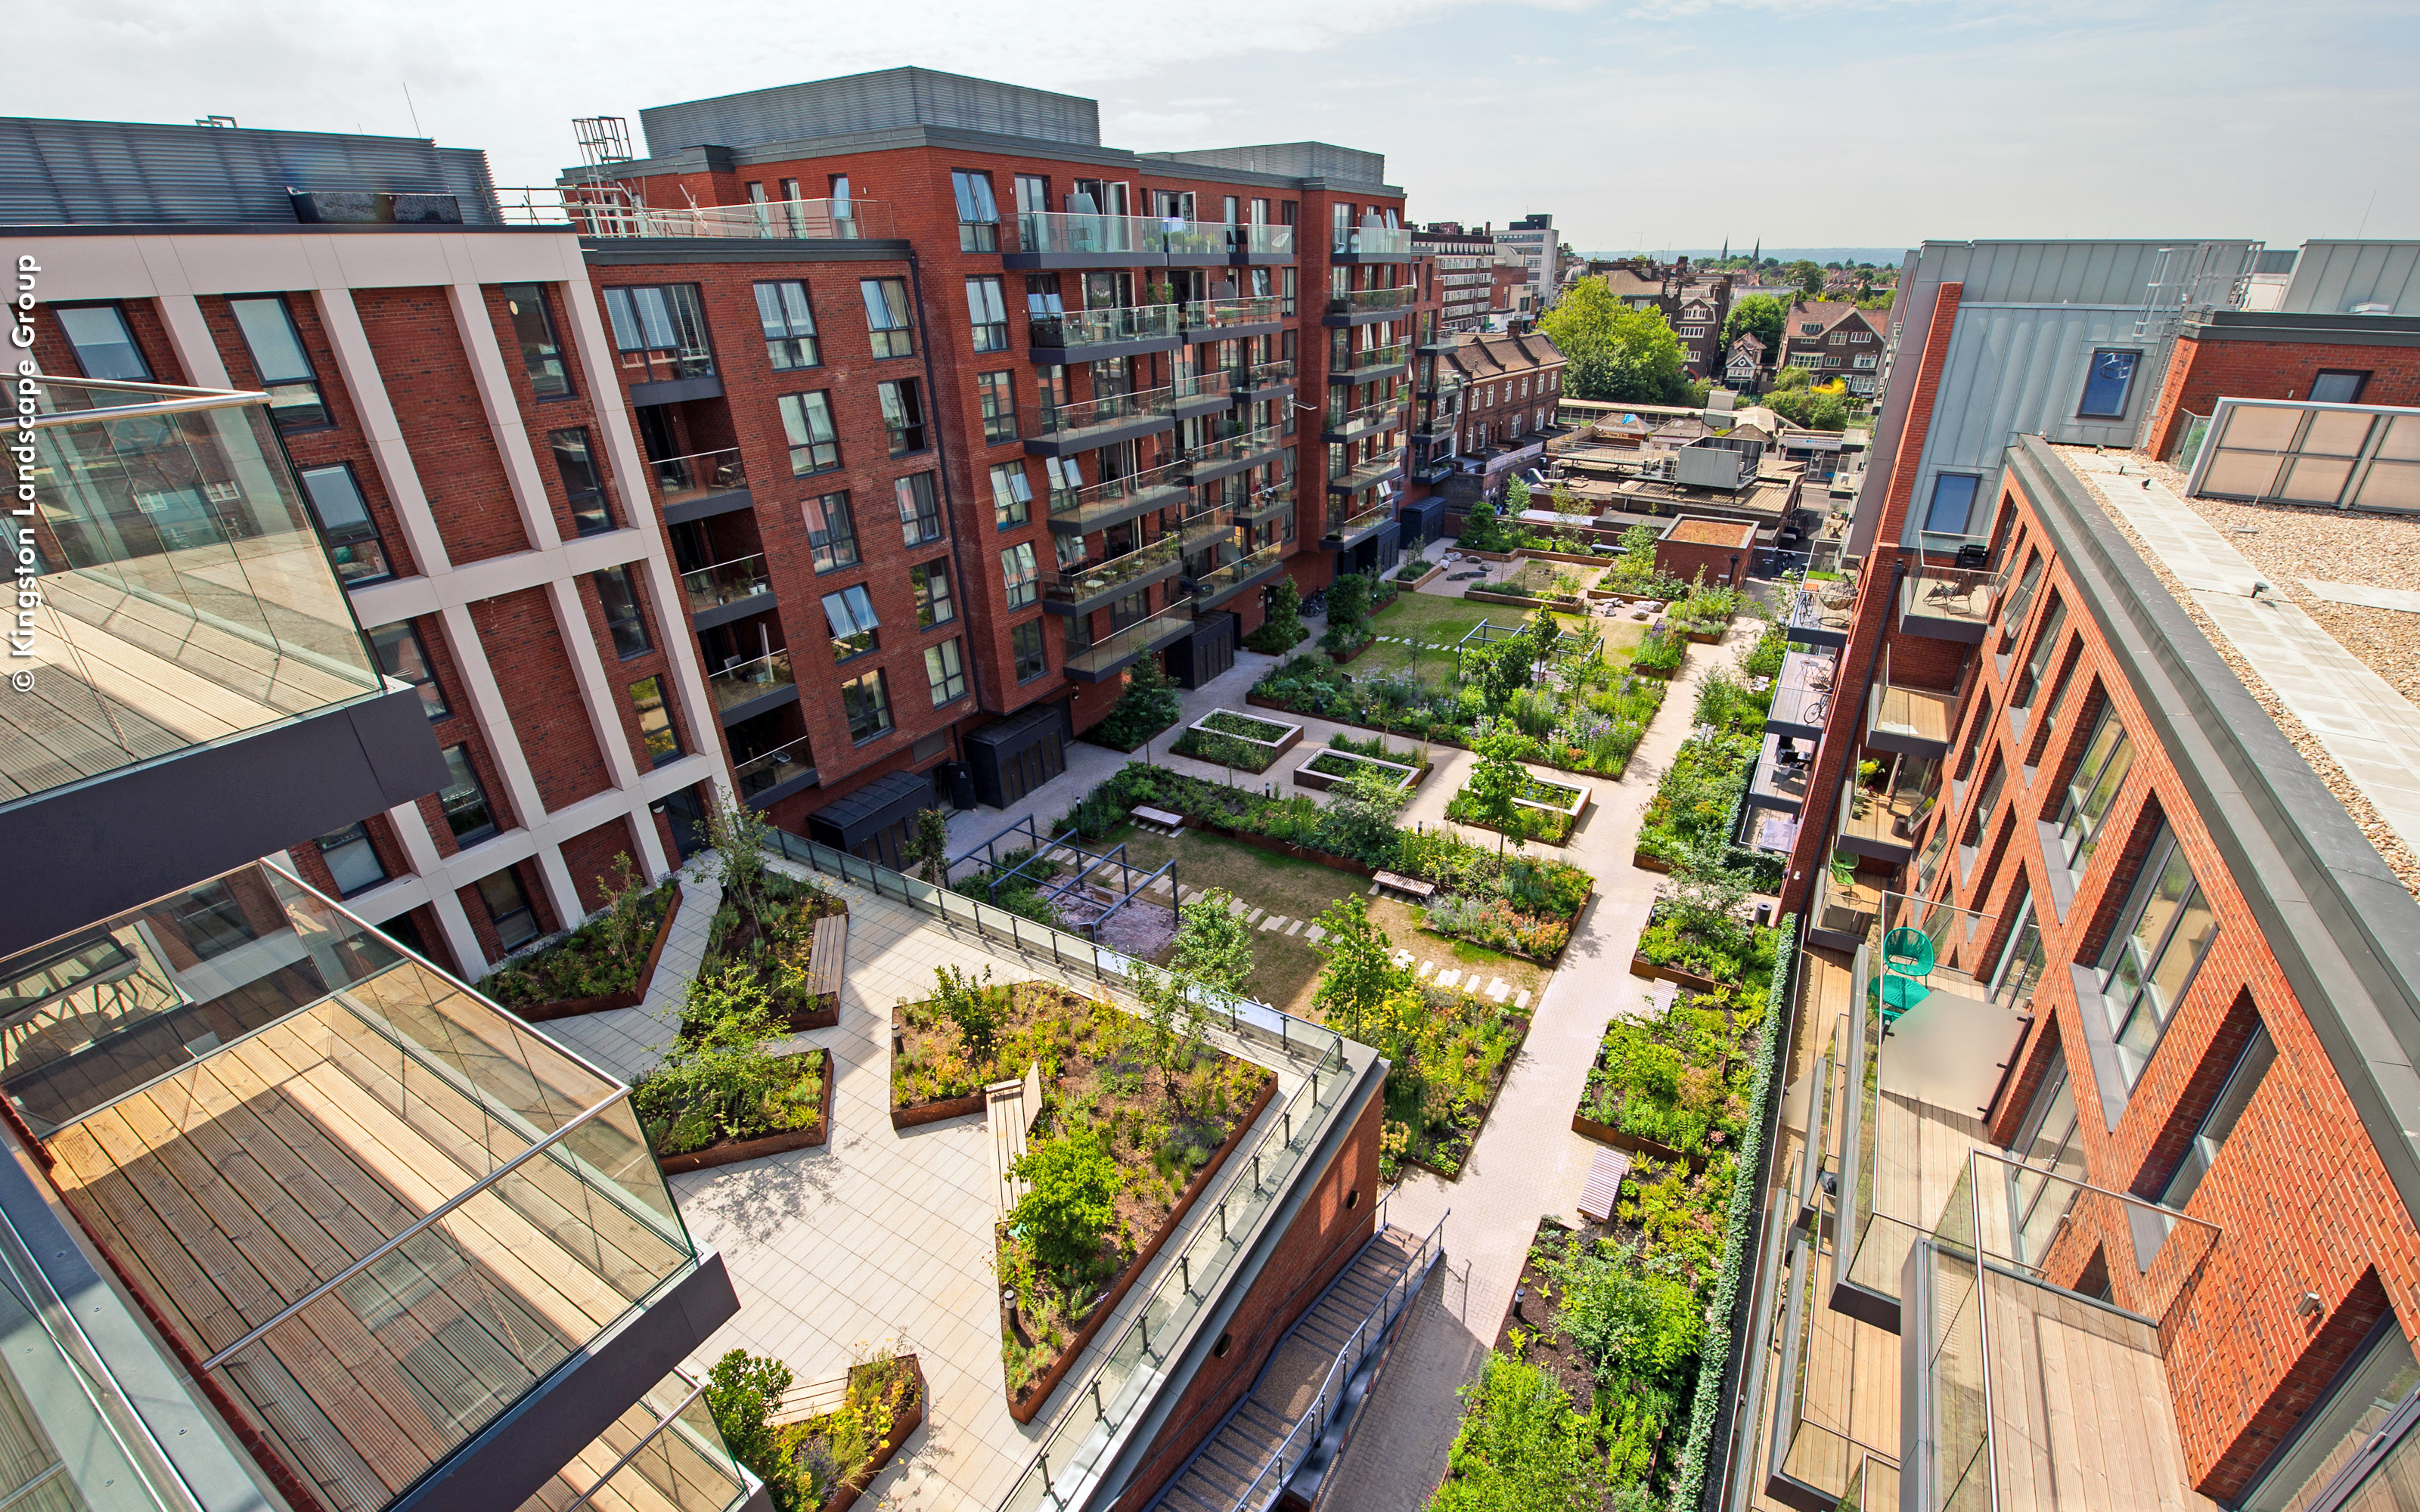 Bird's eye view onto the green courtyard surrounded by multi-storey buildings